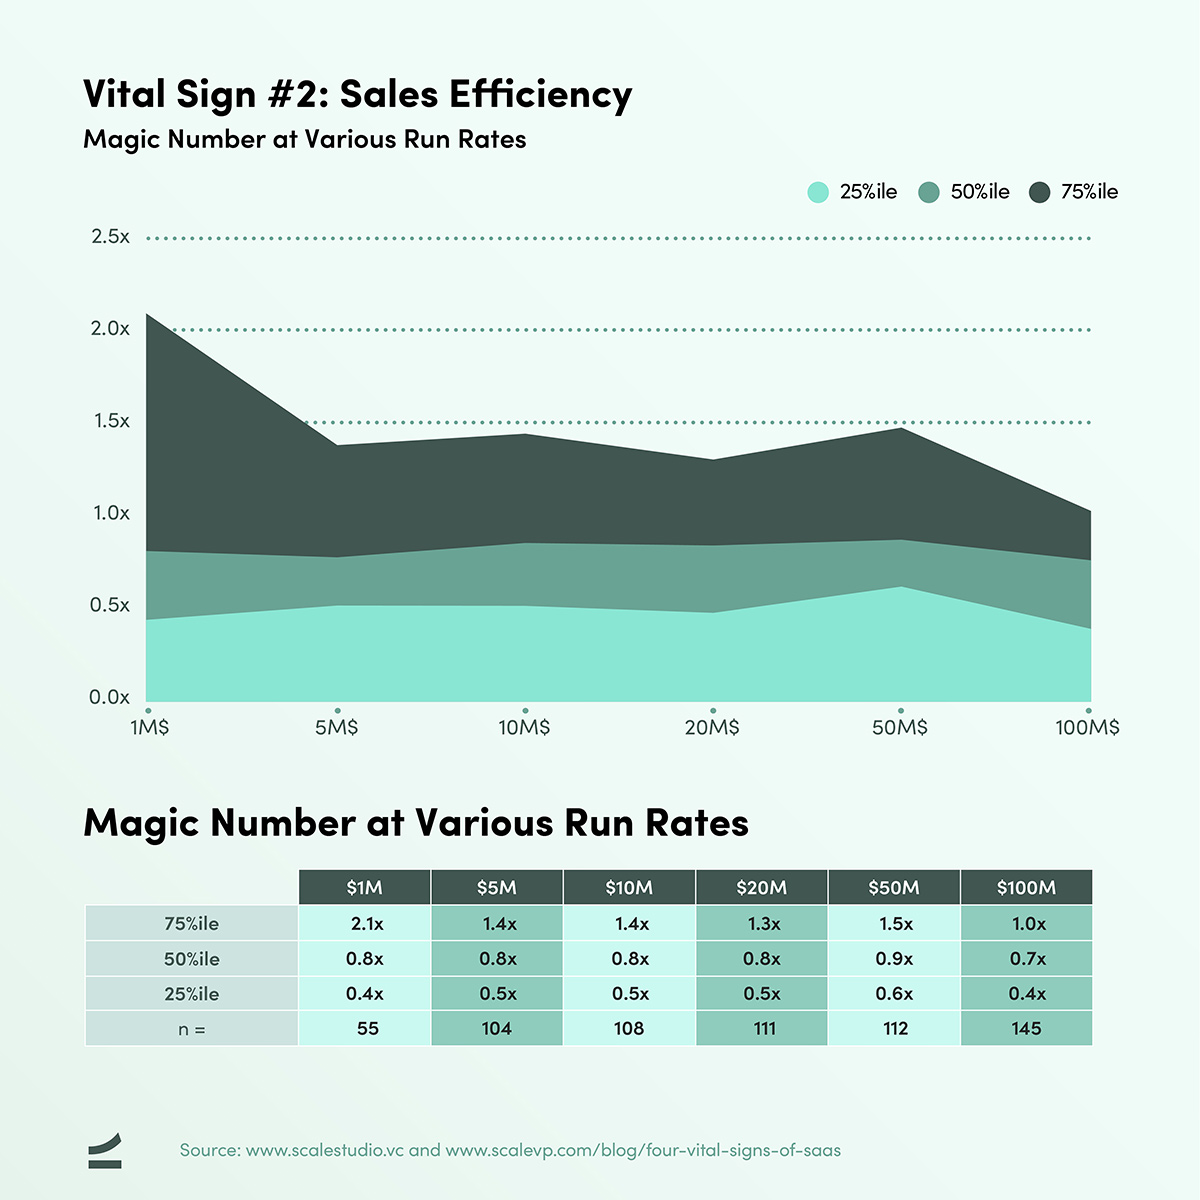 Four Vital Signs of SaaS - Sales Efficiency + Magic Number - chart and table